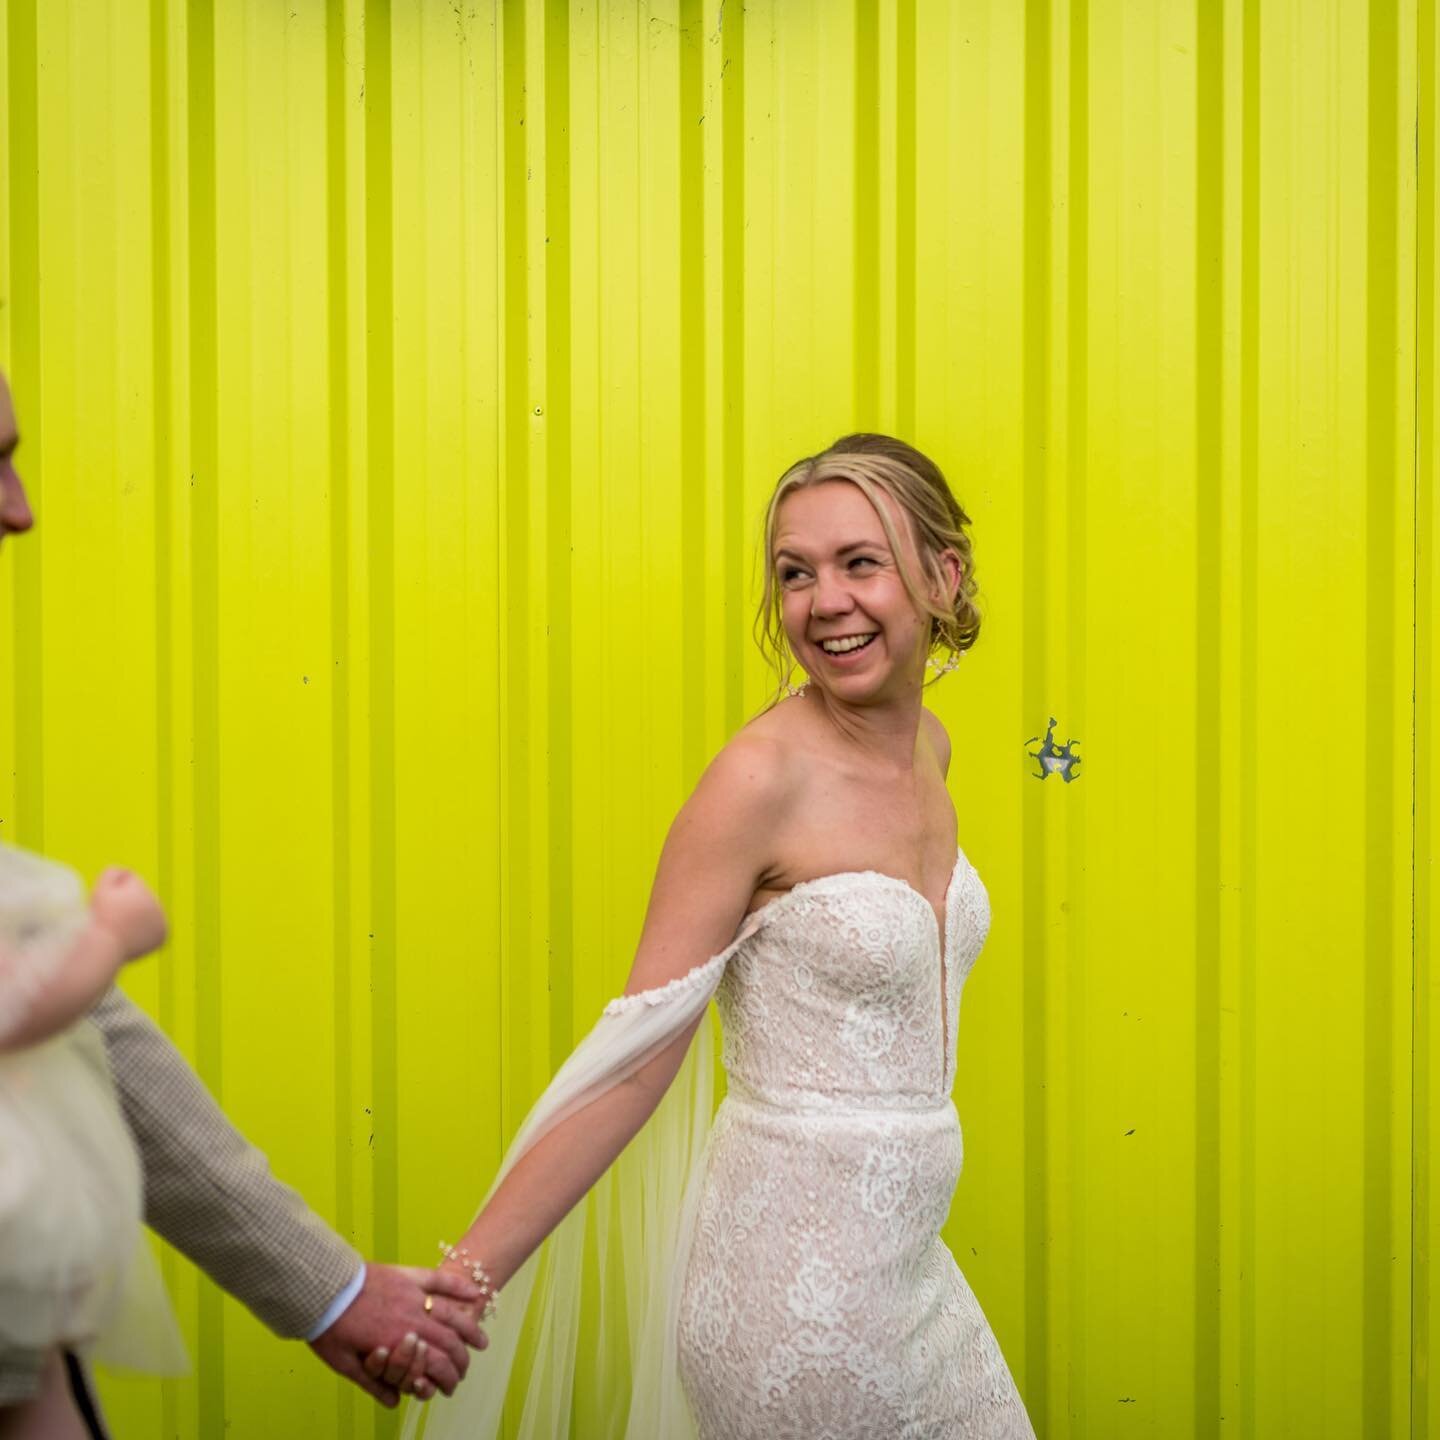 CHECK OUT THESE EPIC SHOTS FROM &ldquo;CITY BRIDE&rdquo; ELLIE&hellip;.⁣
⁣
Ellie wanted a laid back approach to her wedding. ⁣
⁣
They all got ready at an awesome air b&rsquo;n&rsquo;b in nottingham city centre, got married at the council house which 